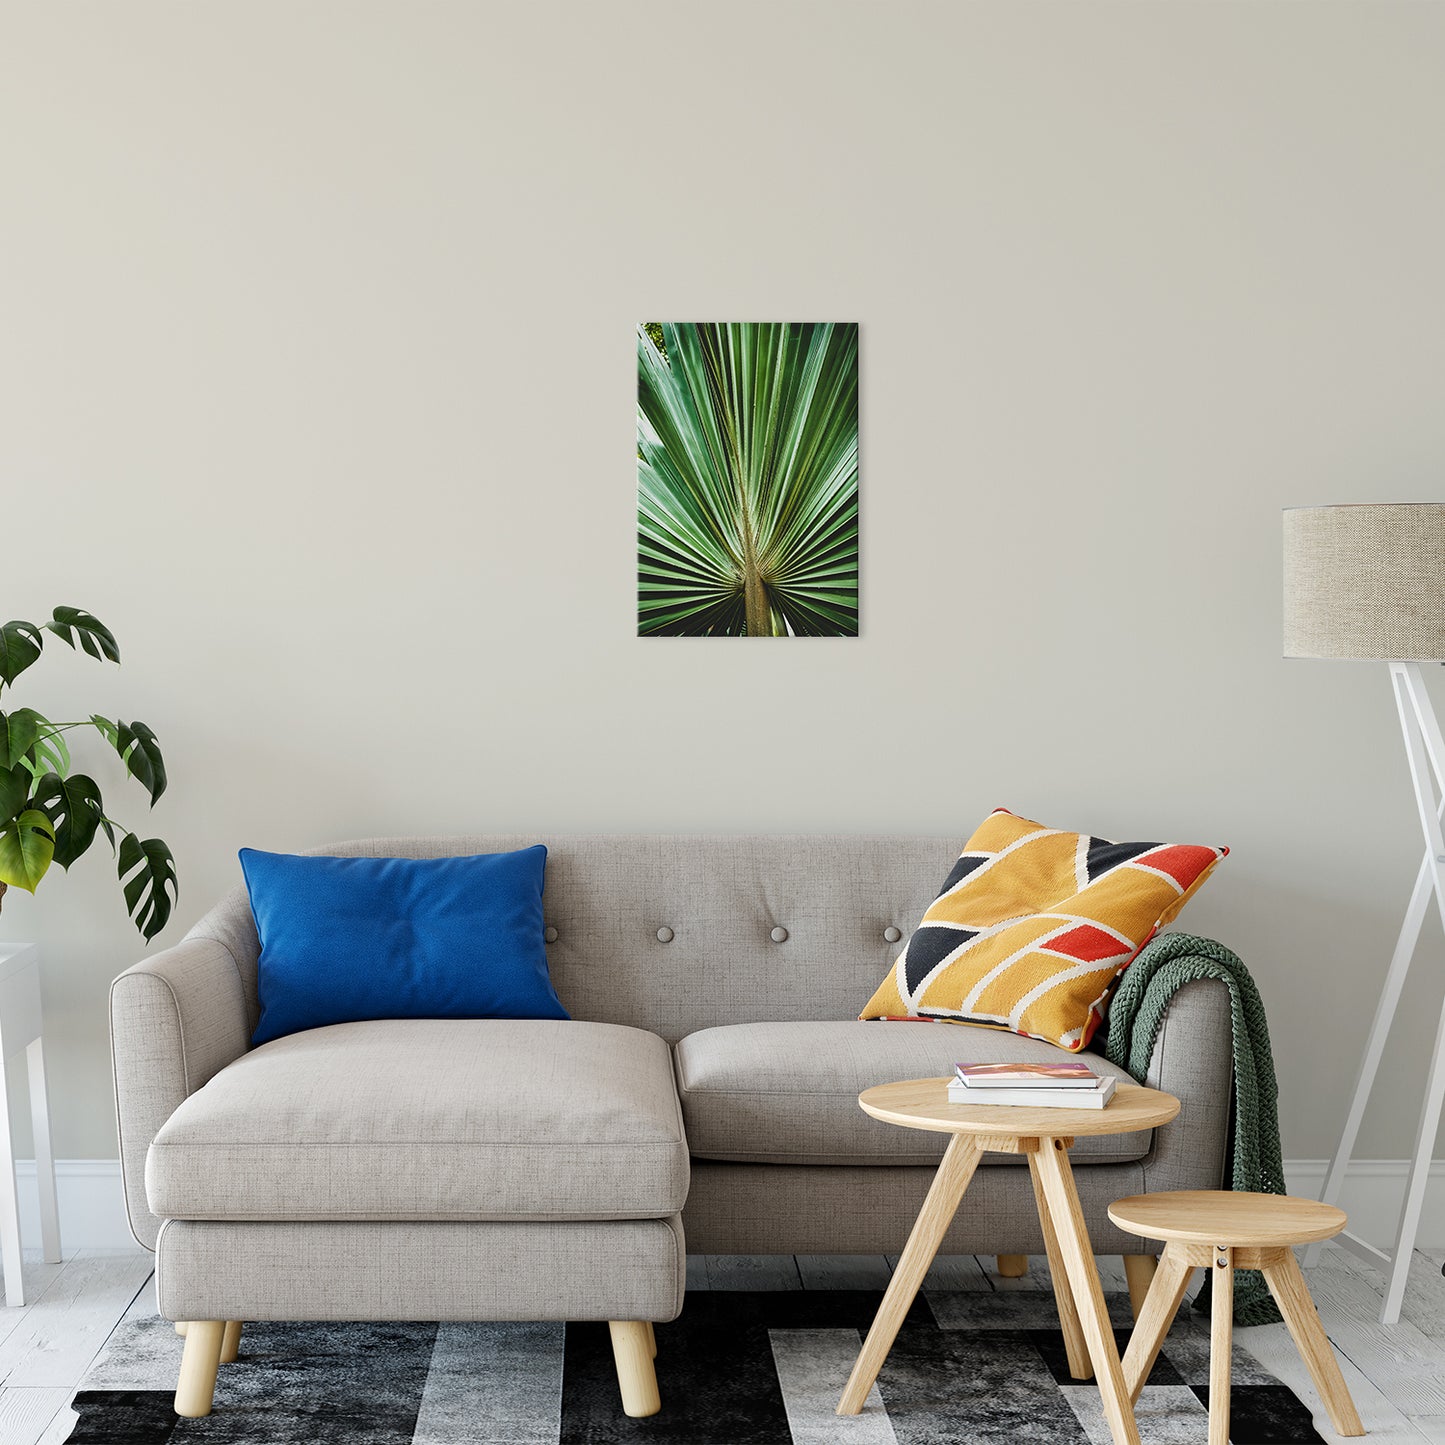 Tropical Abstract Wall Art: Aged & Colorized Wide Palm Leaves 2 Nature / Botanical Photo Fine Art Canvas Wall Art Prints 16" x 20" - PIPAFINEART